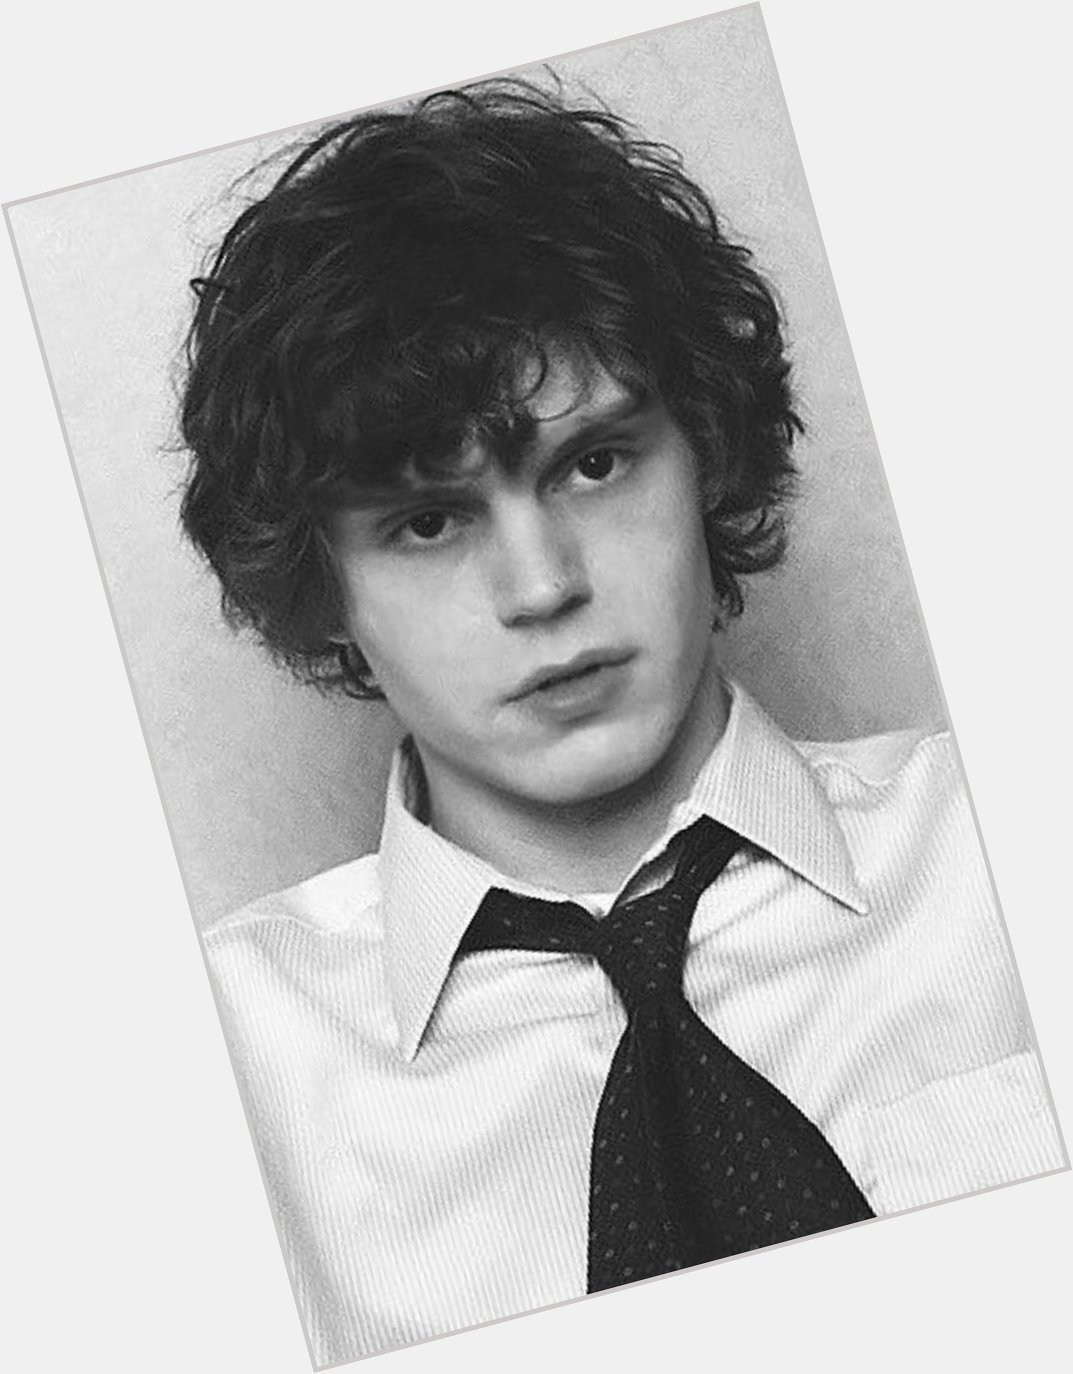 Happy birthday evan peters thanks for giving me my sexual awakening  to curly haired boys in grade 6 <3 